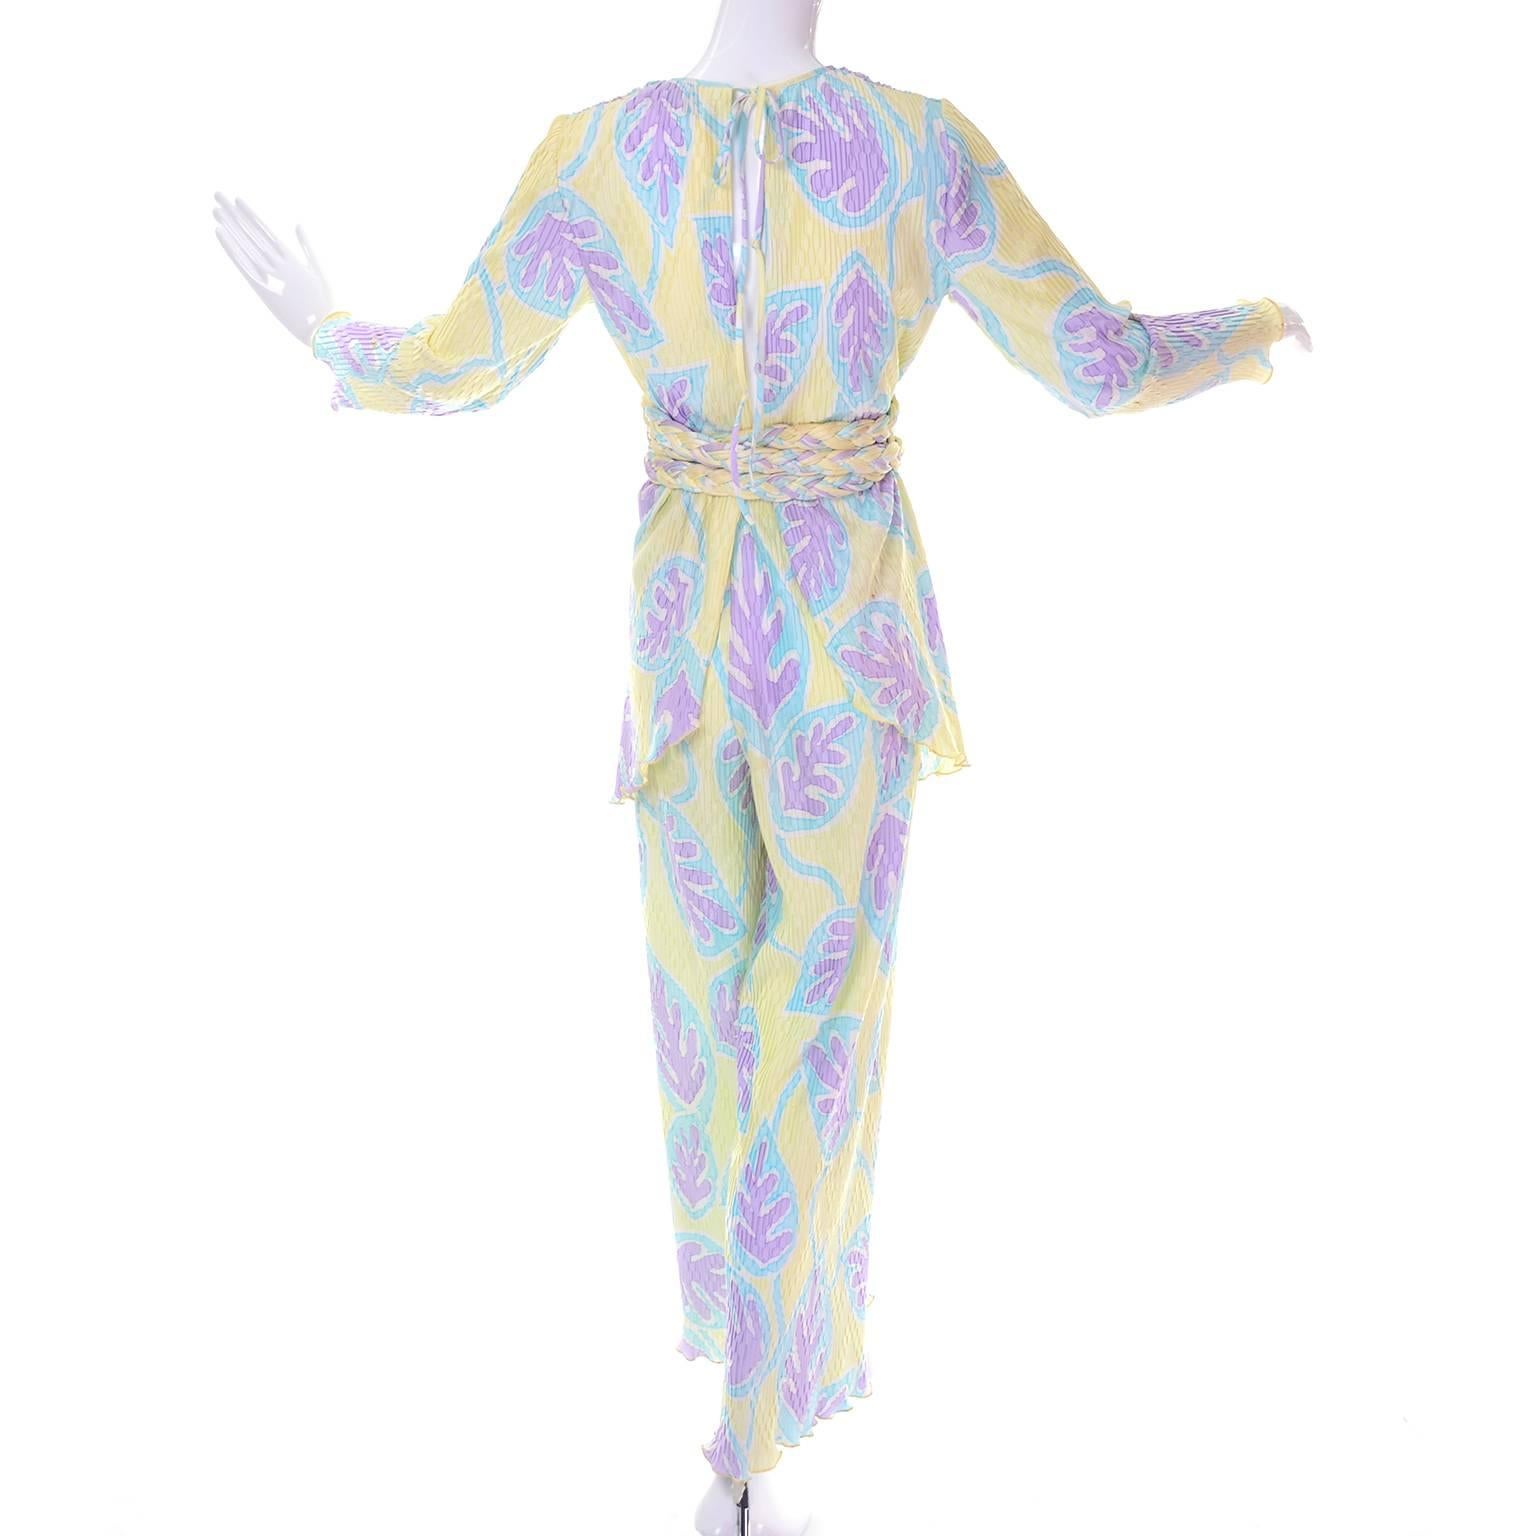 This is an early Mary McFadden Collection I ensemble from Bergdorf Goodman. Please press 